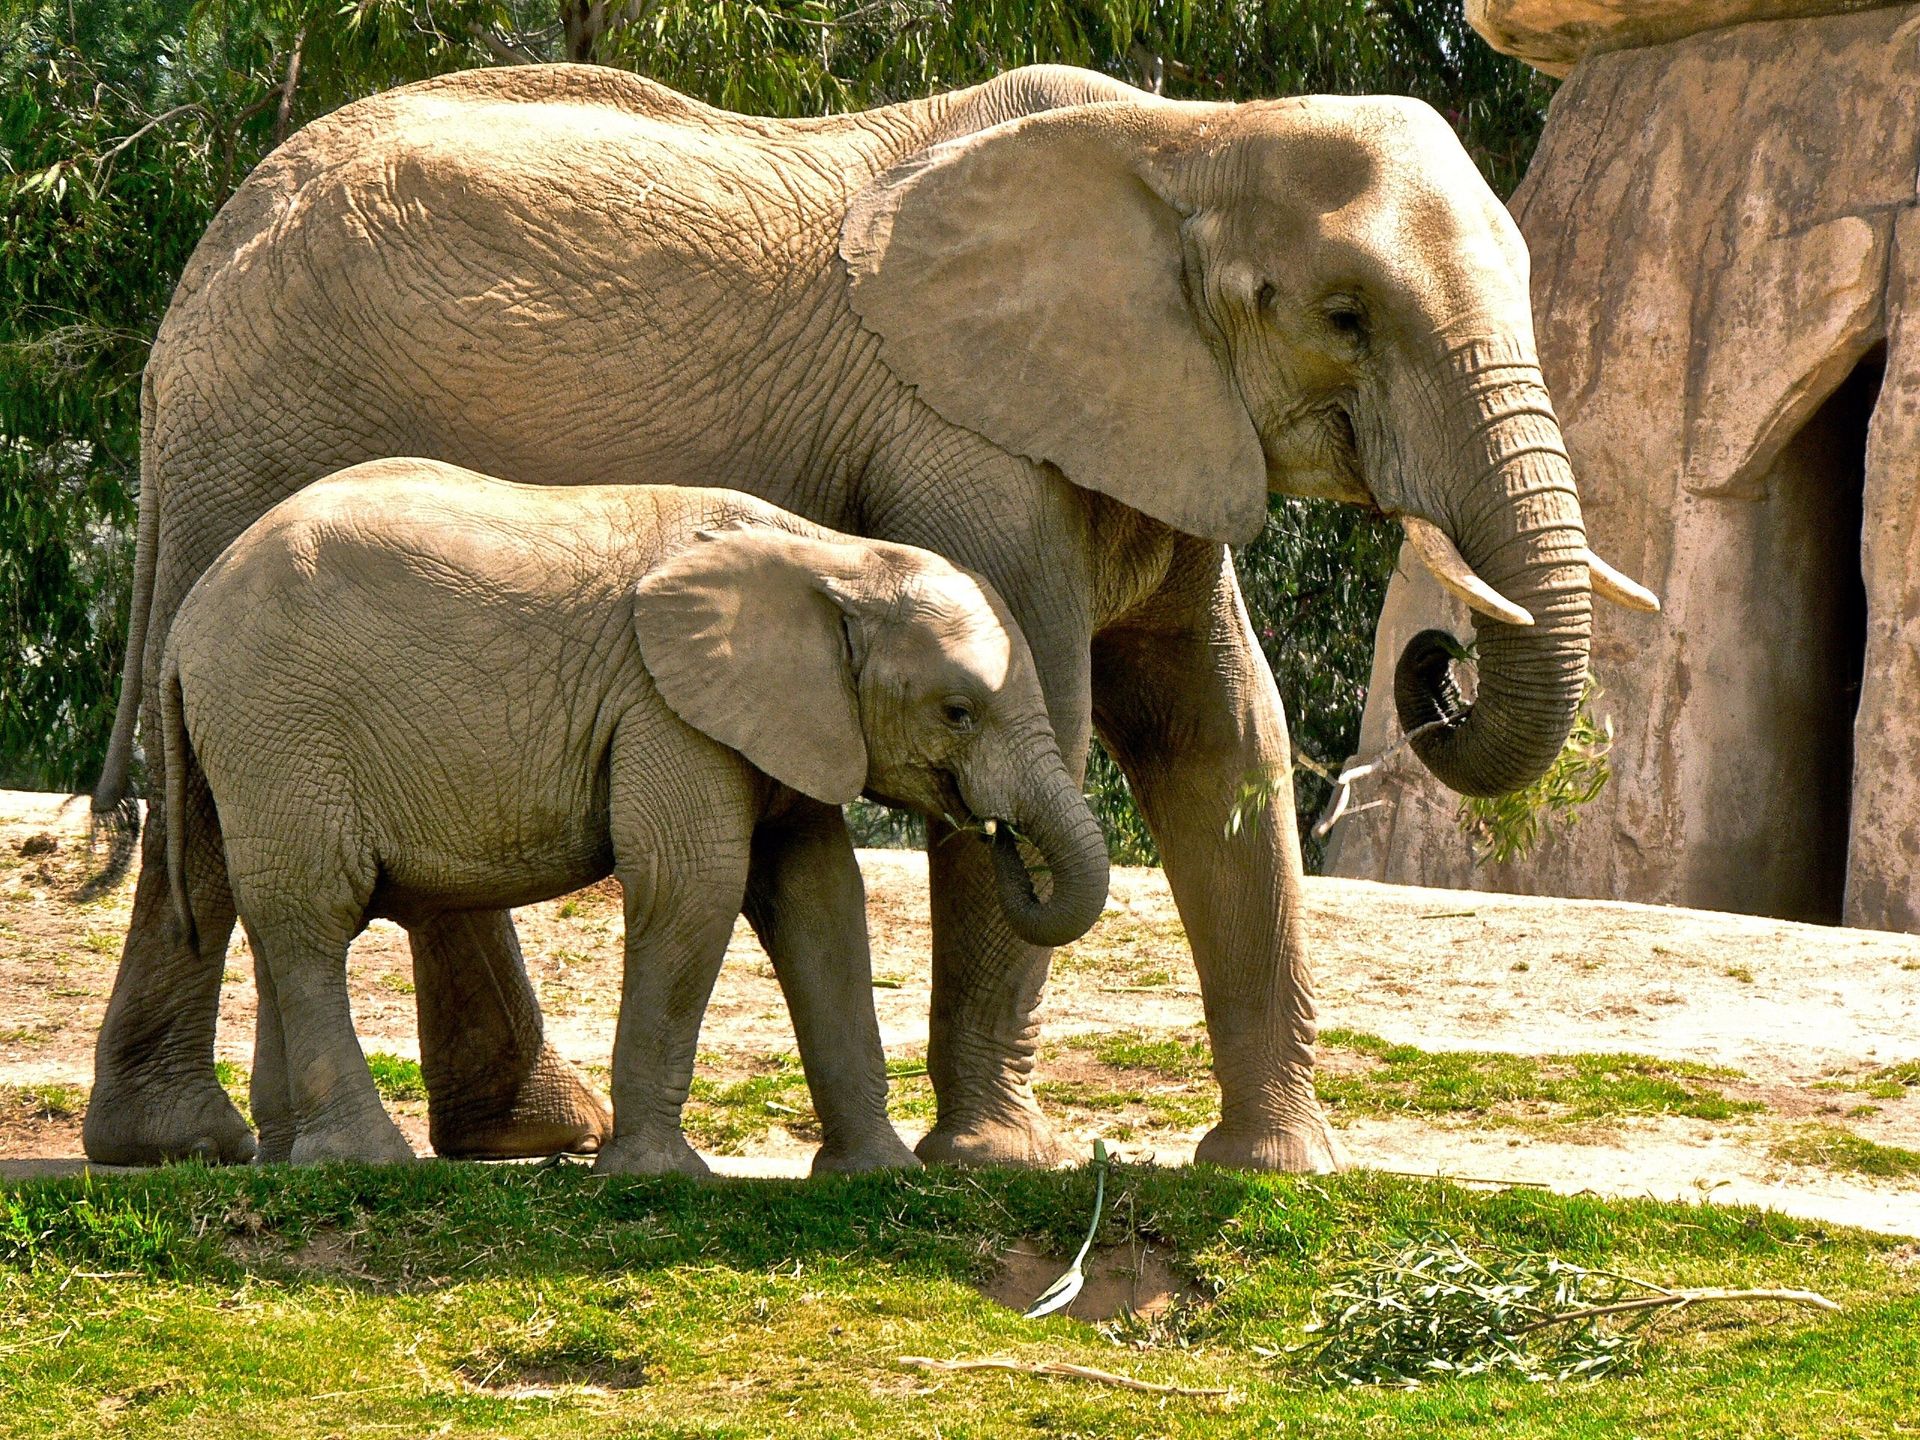 An elephant calf stands close to its mother.